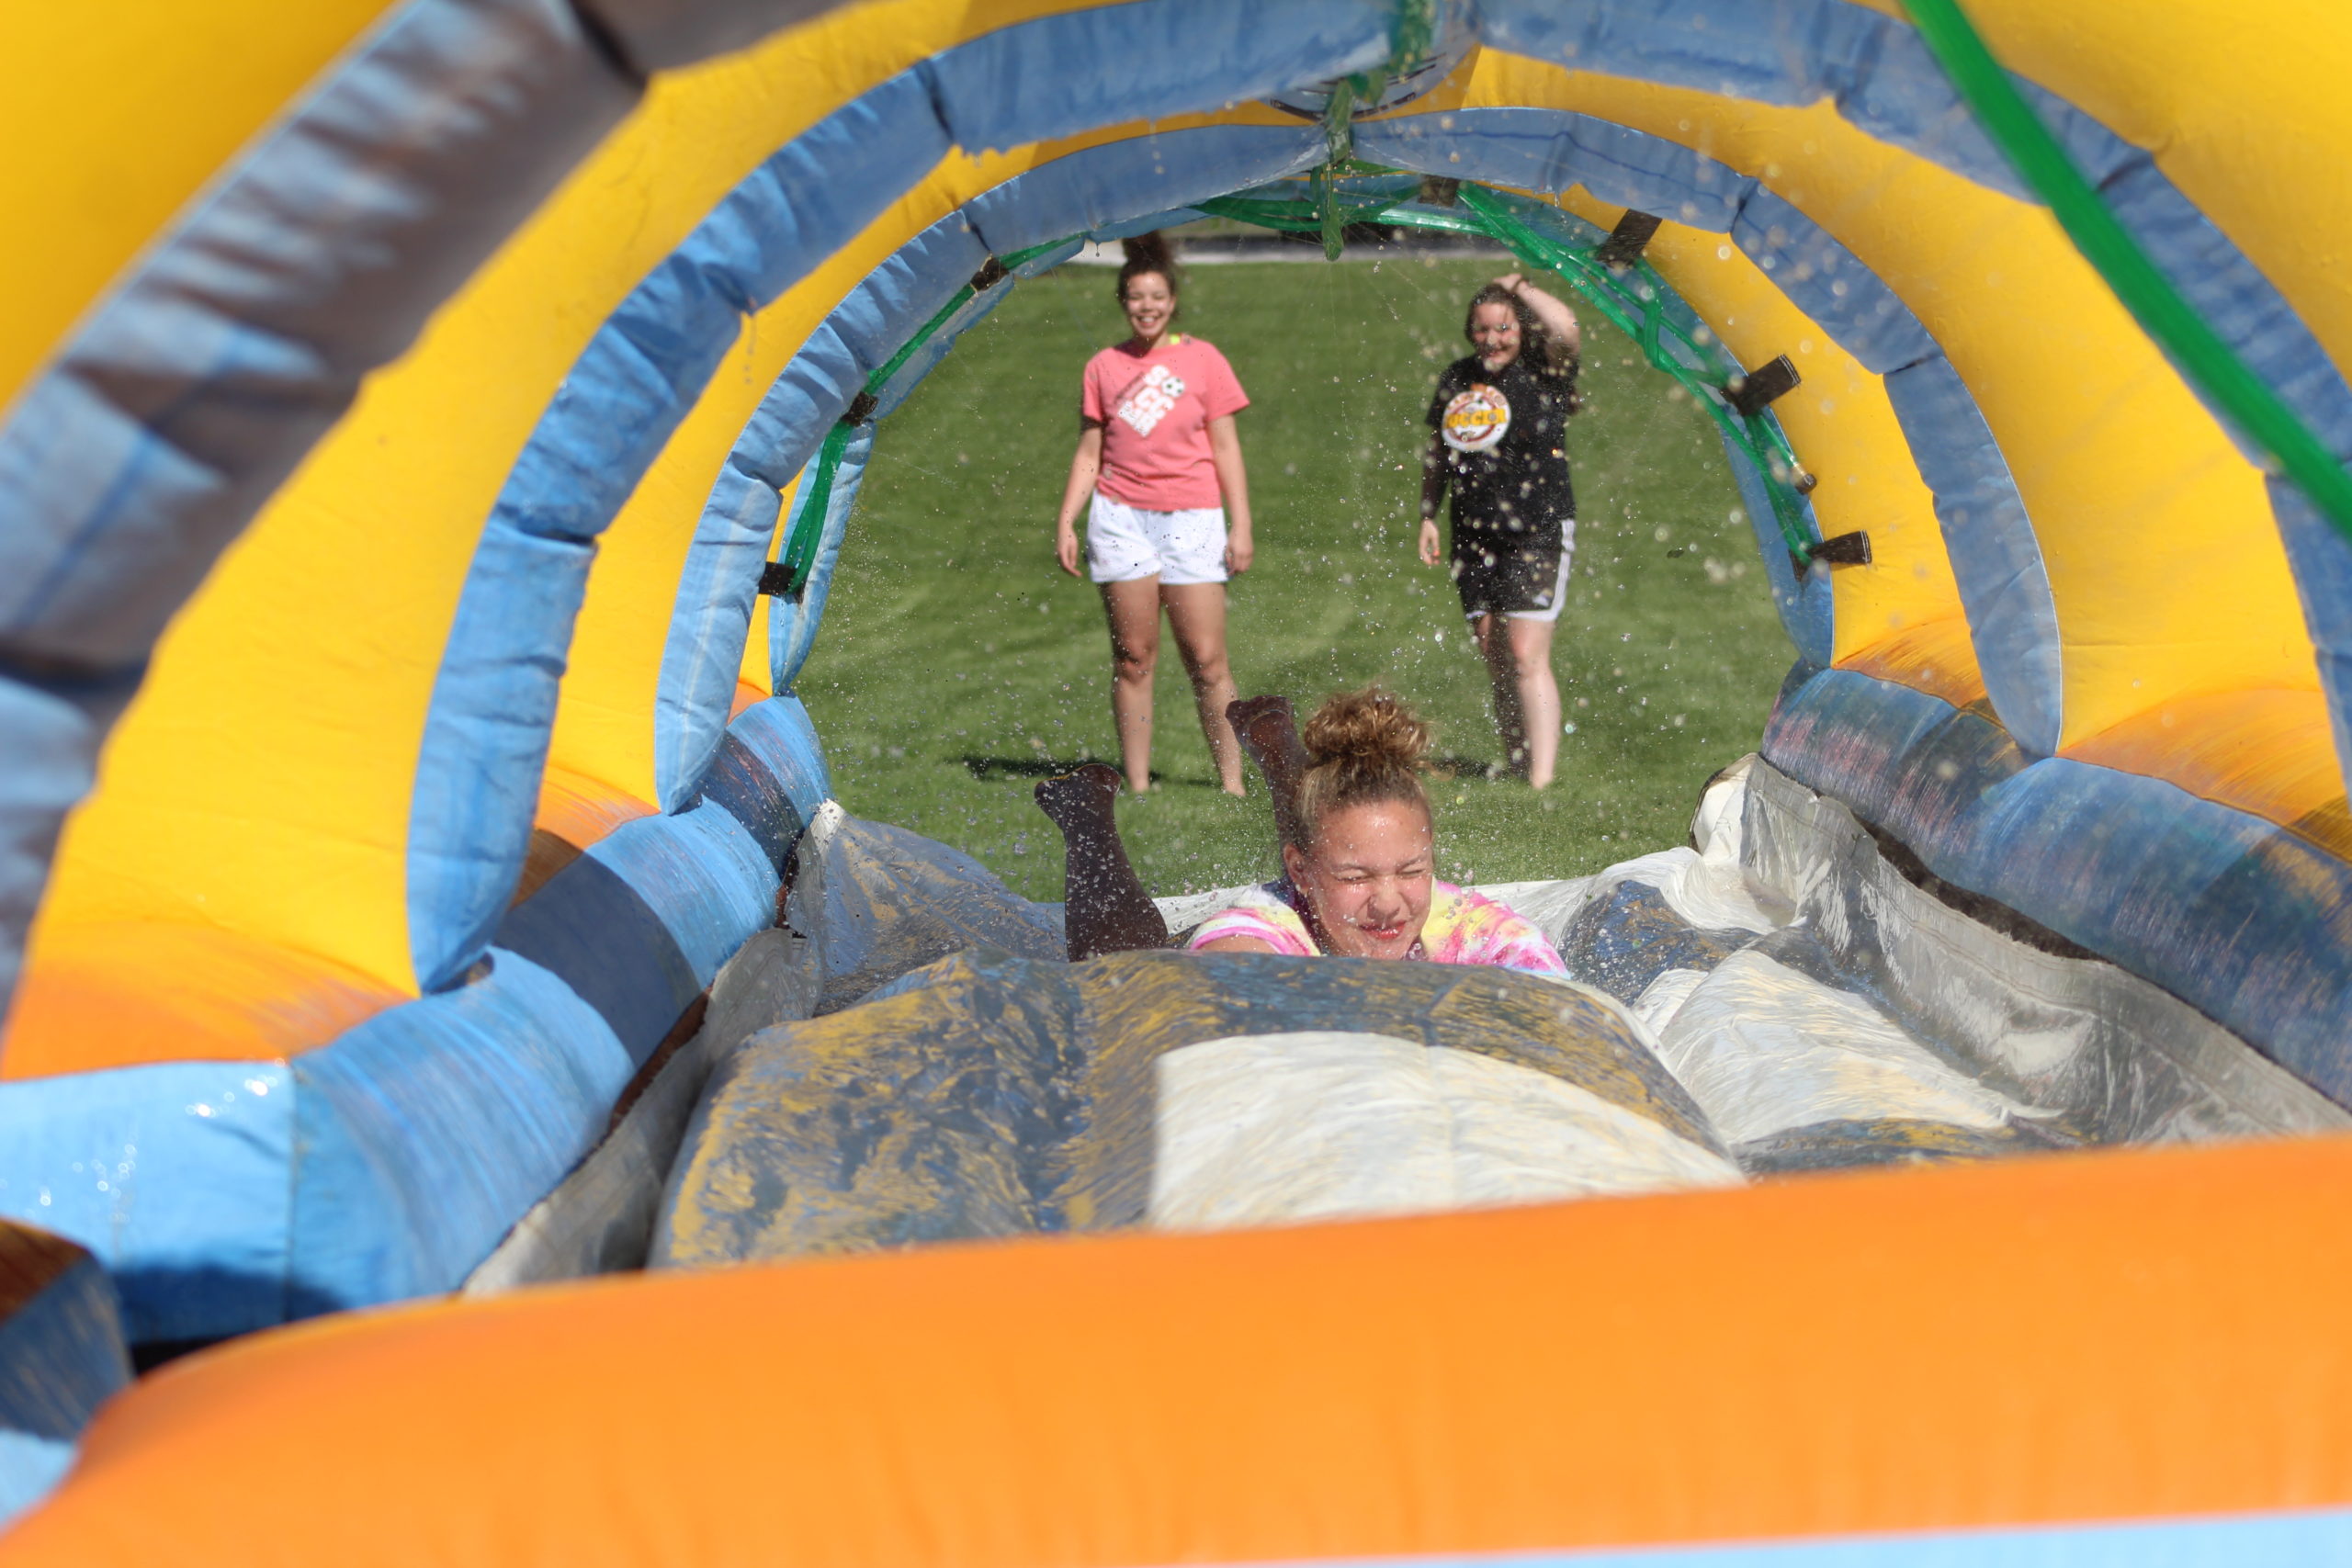 Blackburn student going through a water slide as two other students stare at her in the background.